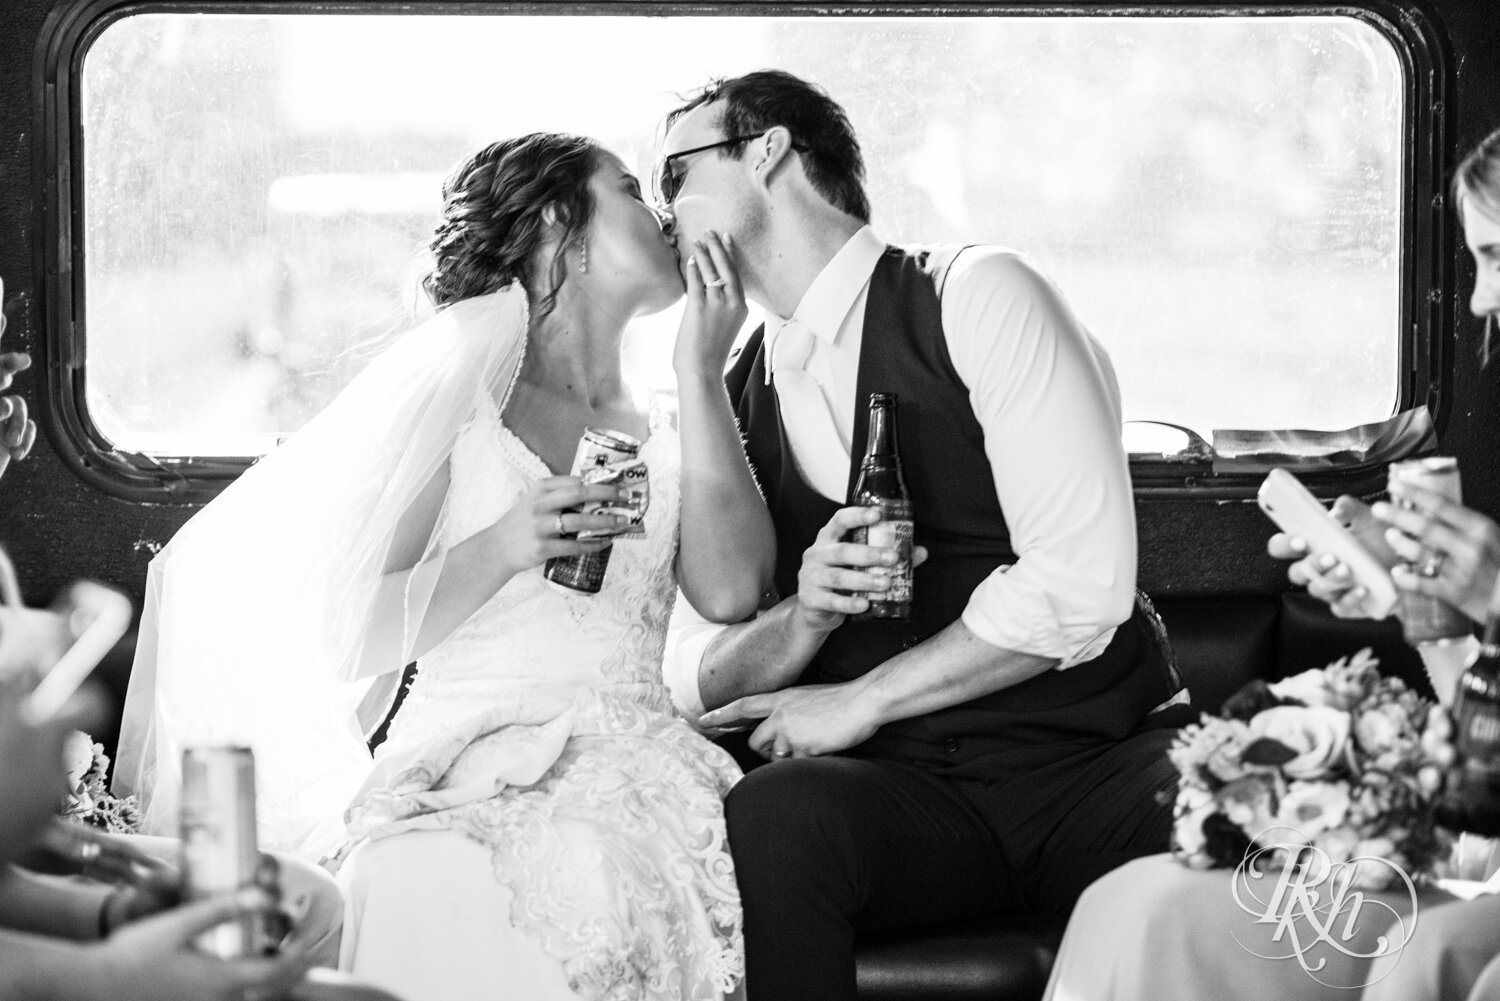 Bride and groom kiss in the back of the party bus in Mankato, Minnesota.